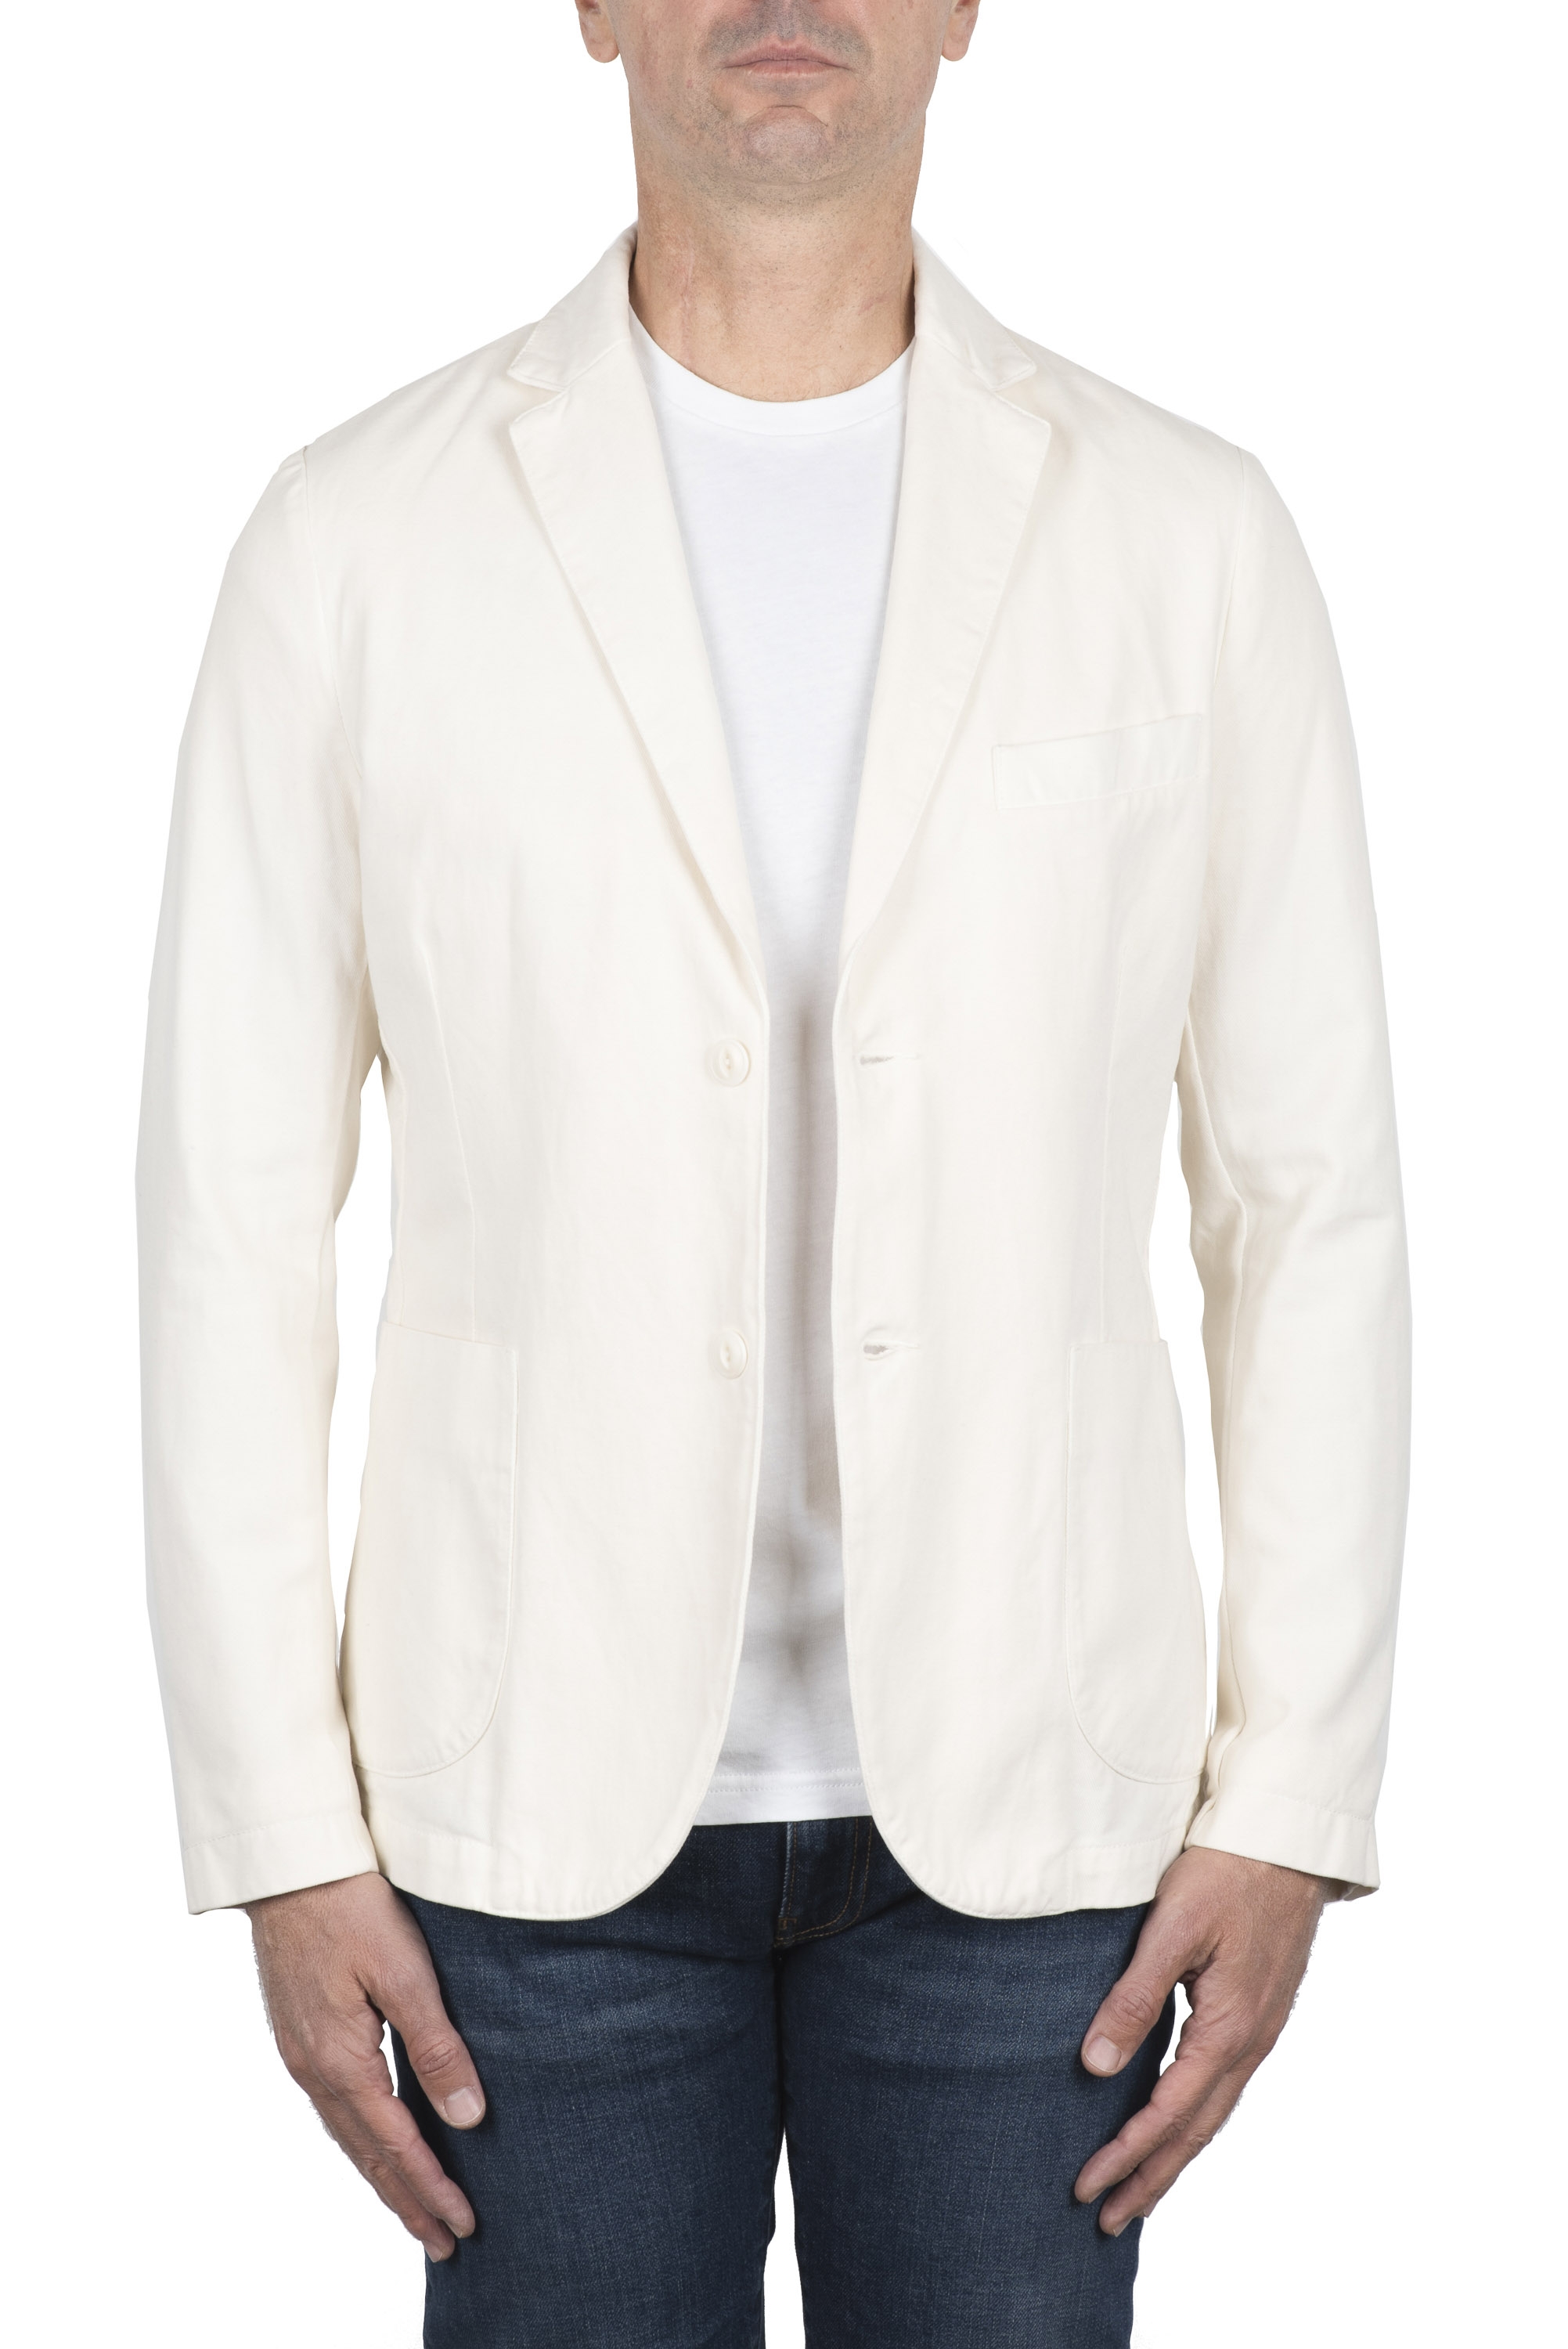 SBU 04573_23AW White cotton and cashmere blend sport coat 01